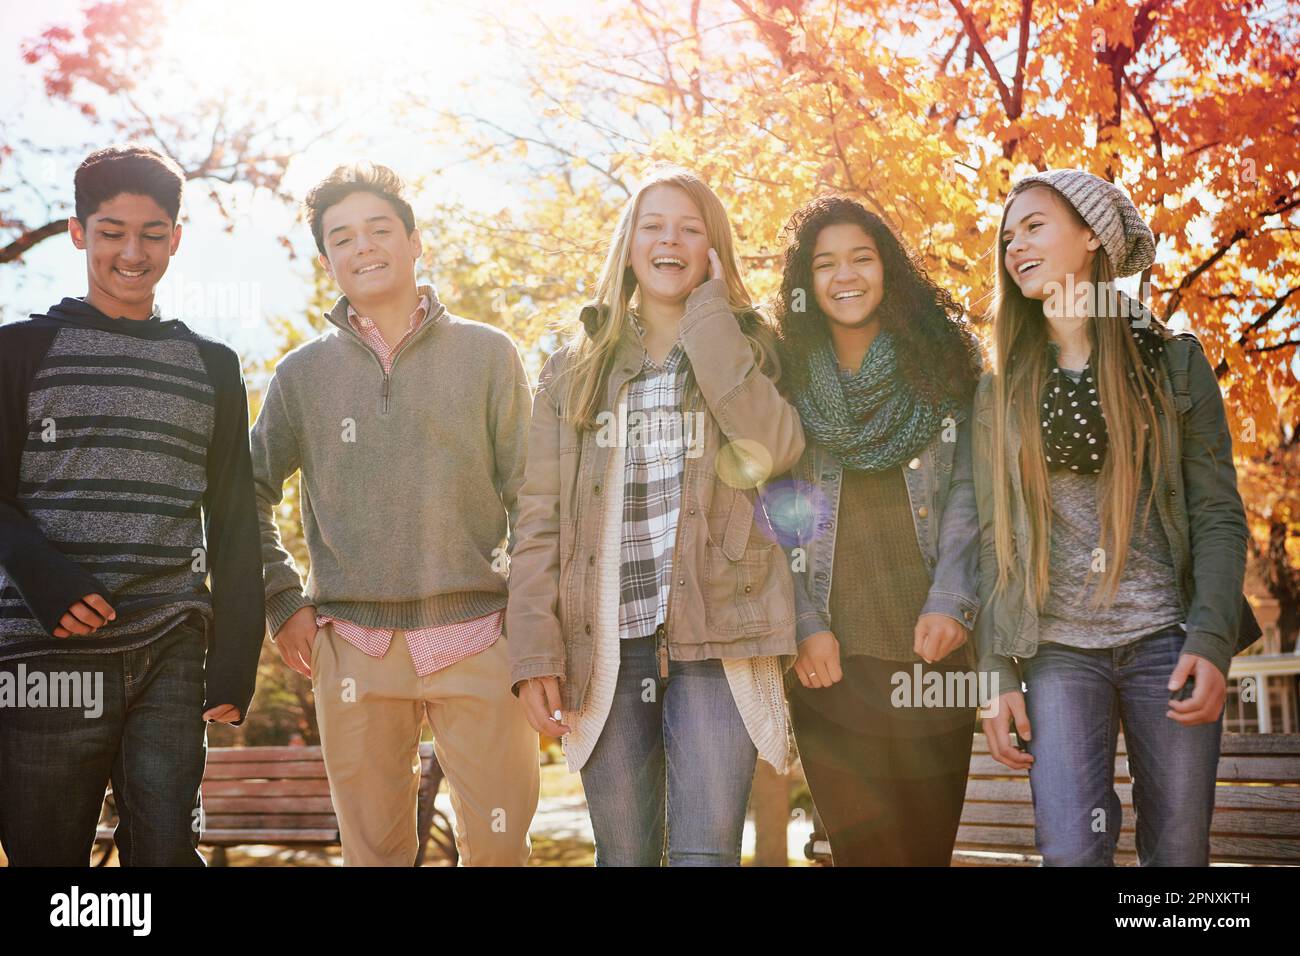 Just chillin. a group of teenage friends enjoying an autumn day outside together. Stock Photo